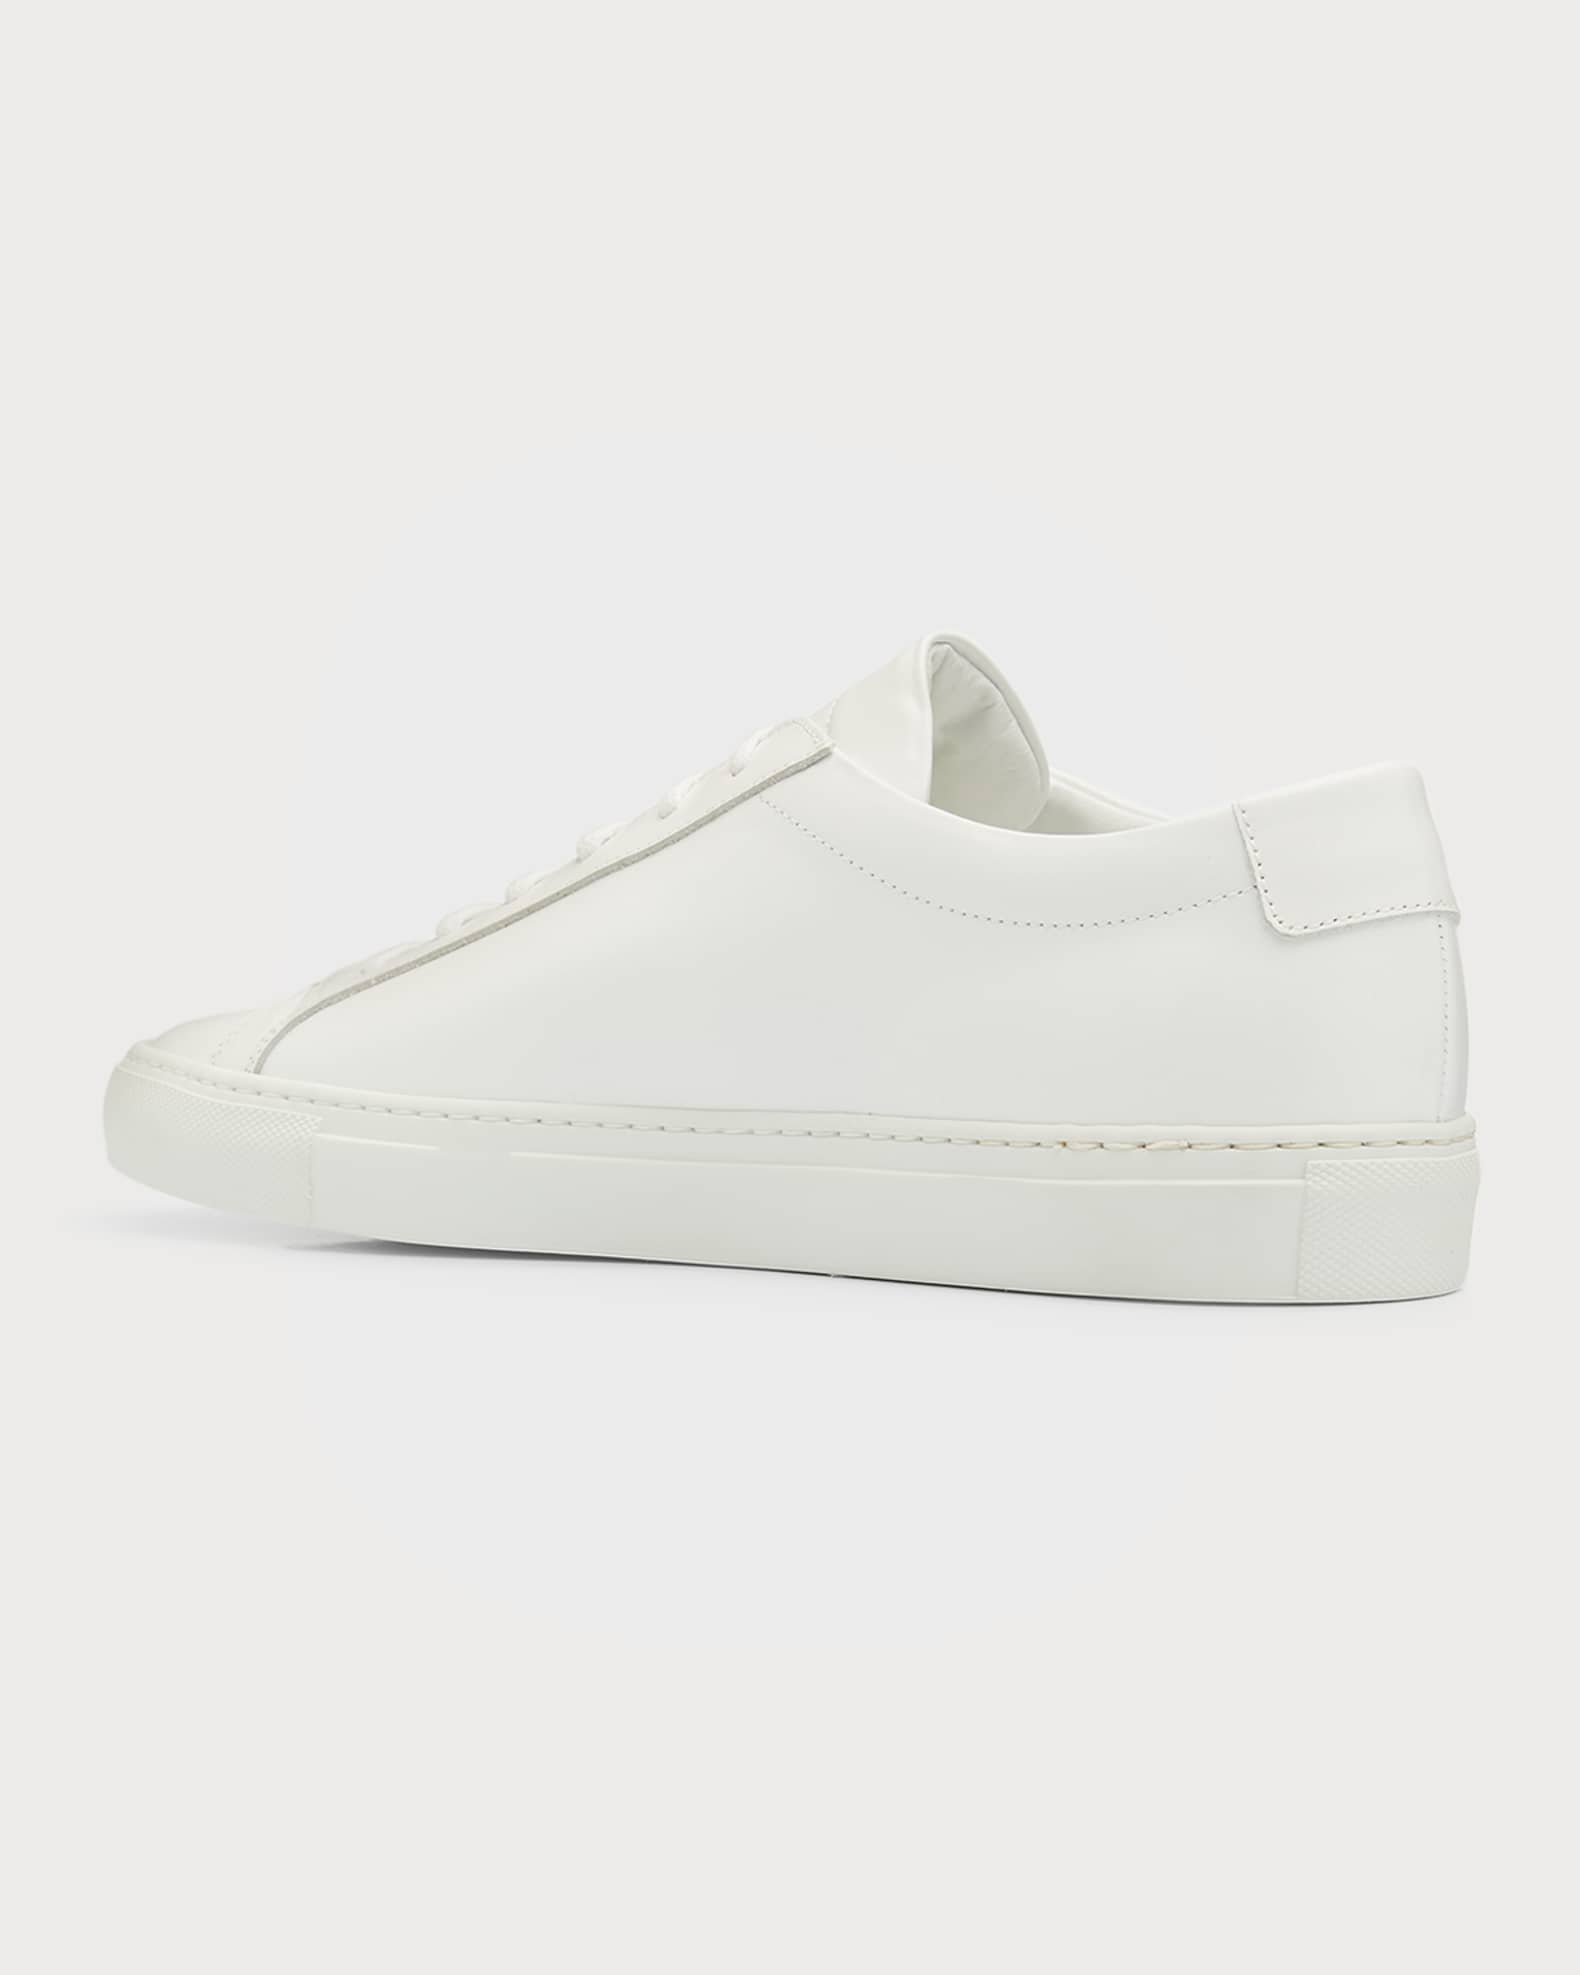 Common Projects Men's Achilles Leather Low-top Sneakers, White